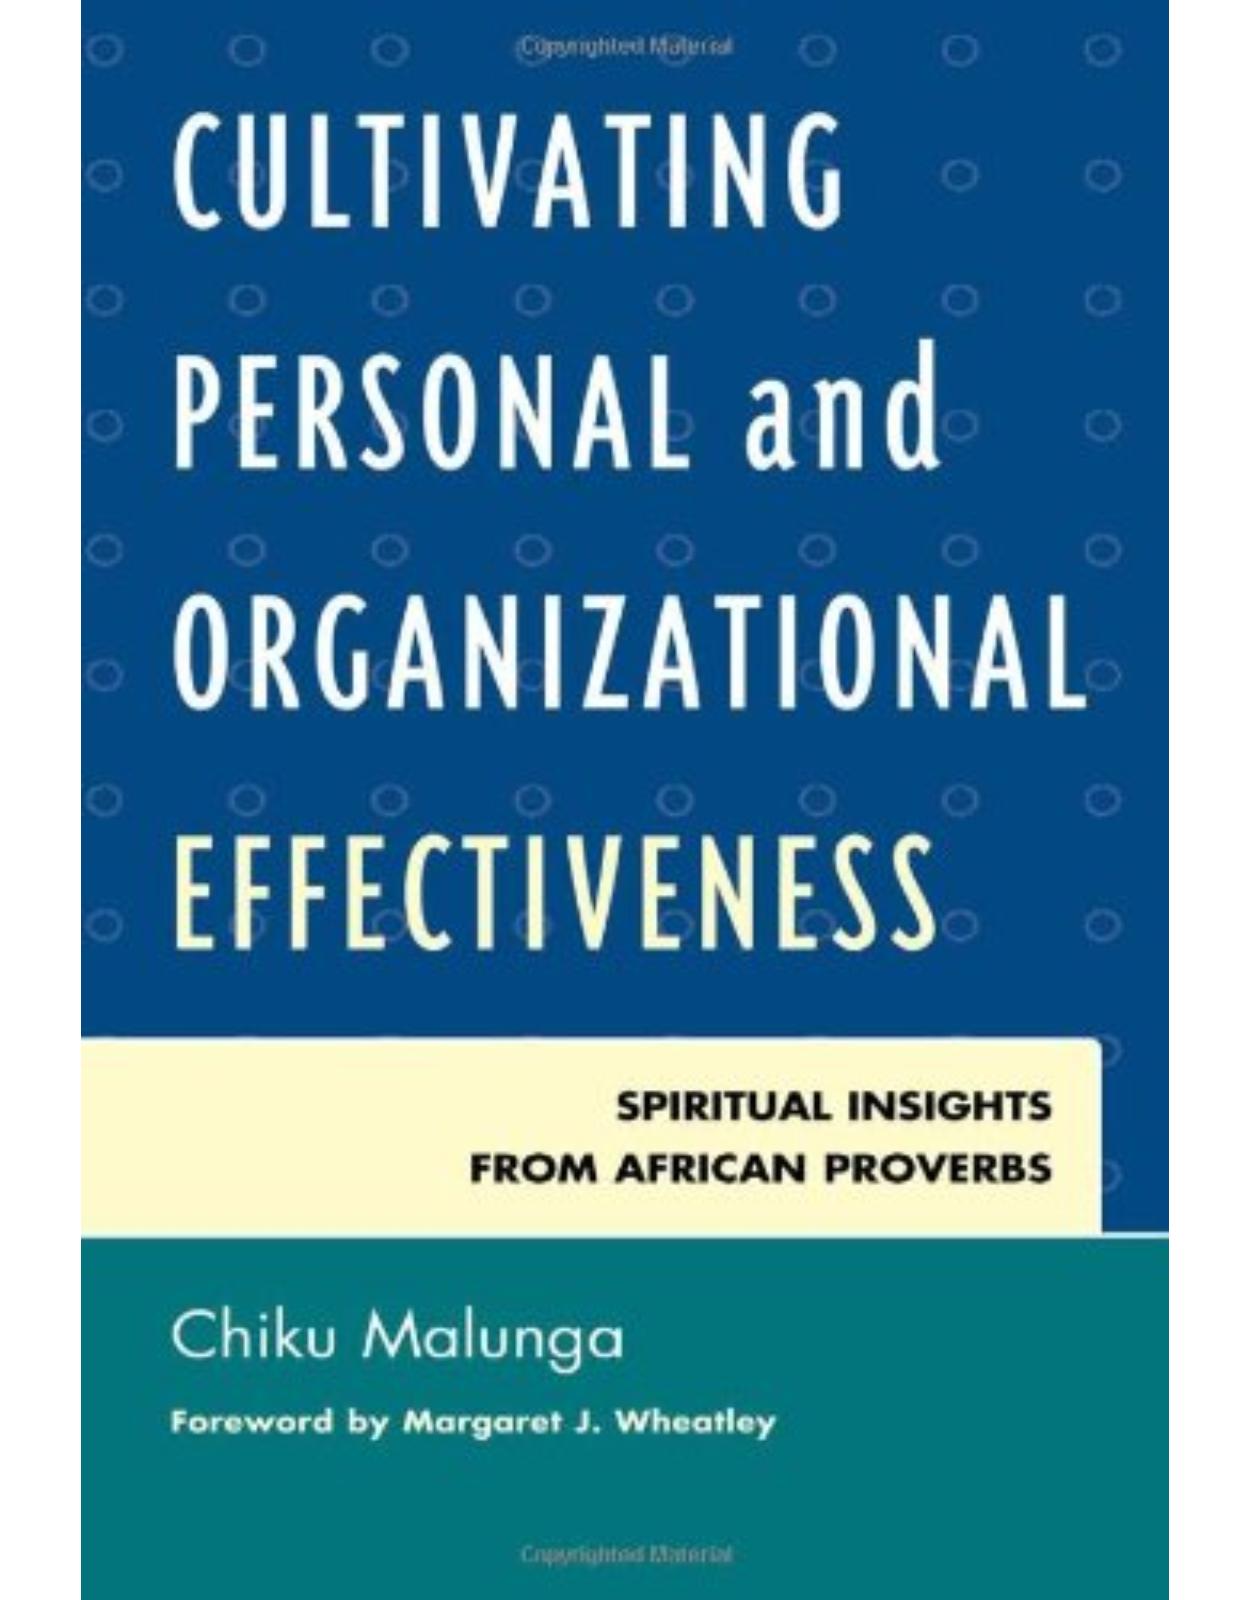 Cultivating Personal and Organizational Effectiveness: Spiritual Insights from African Proverbs